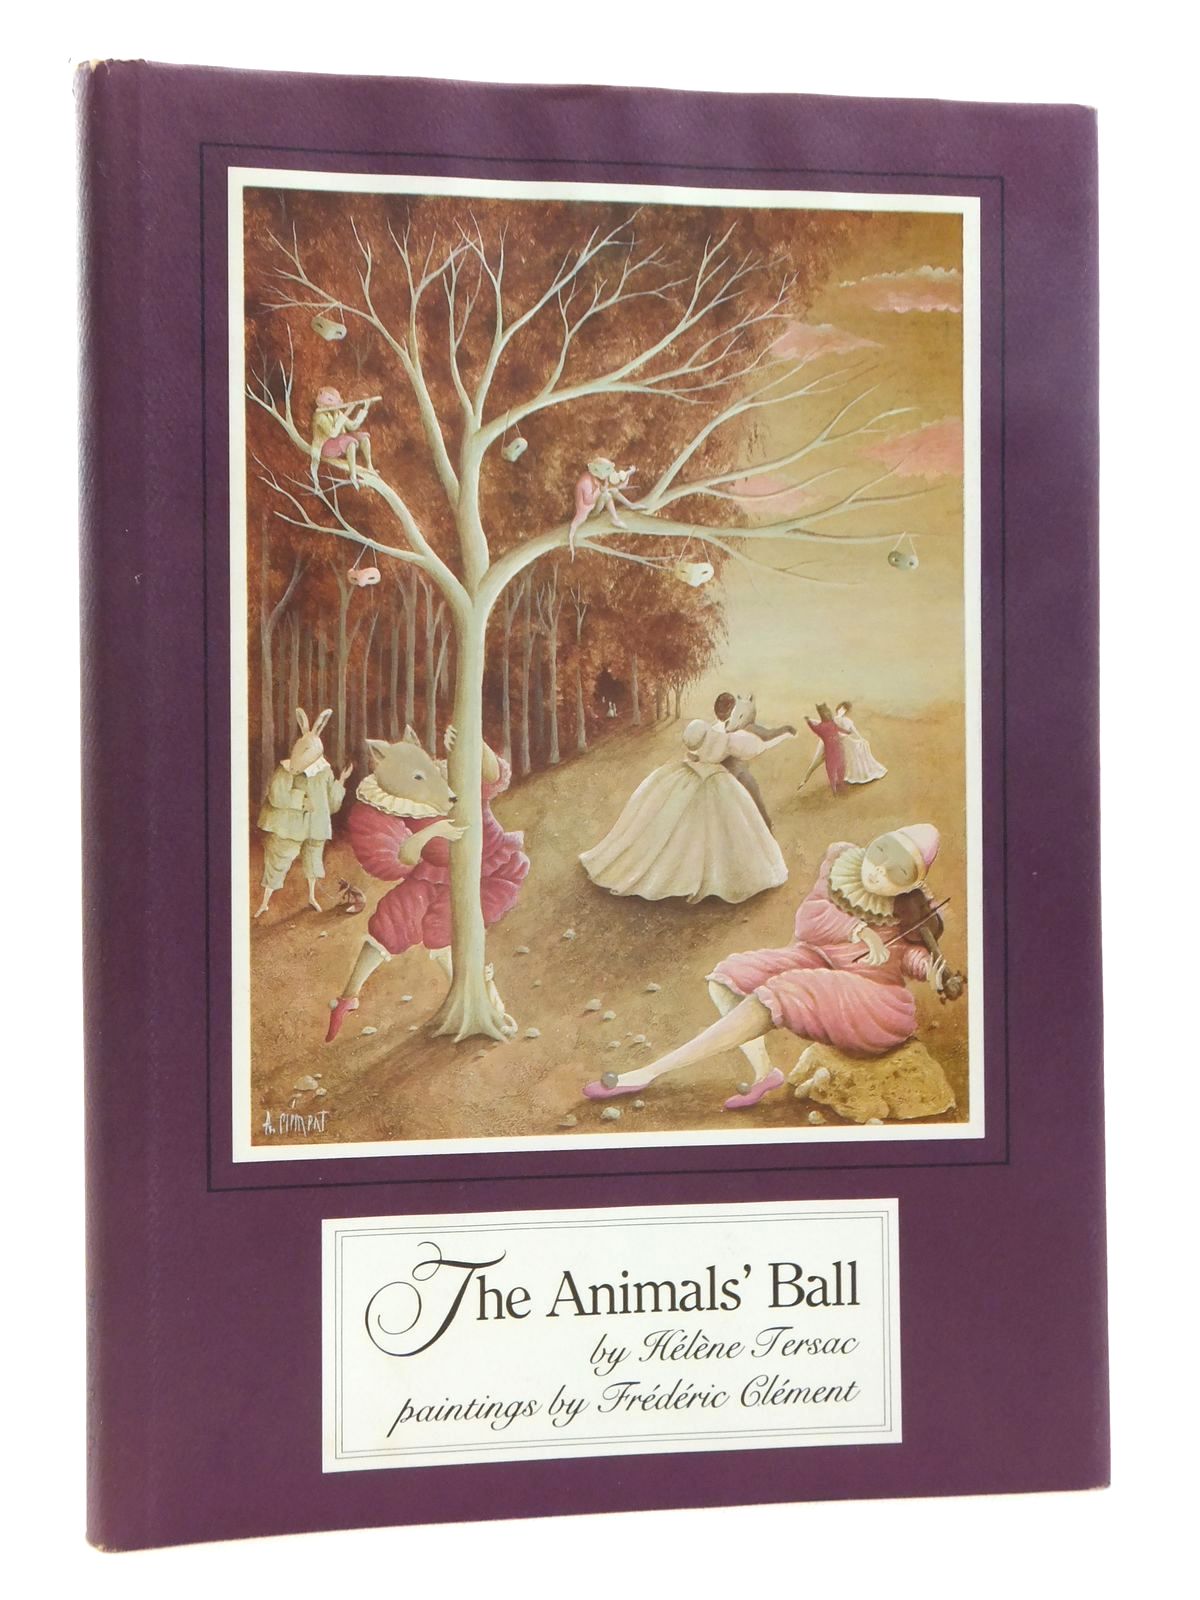 TERSAC, HELENE ILLUSTRATED BY CLEMENT, FREDERIC - The Animals' Ball